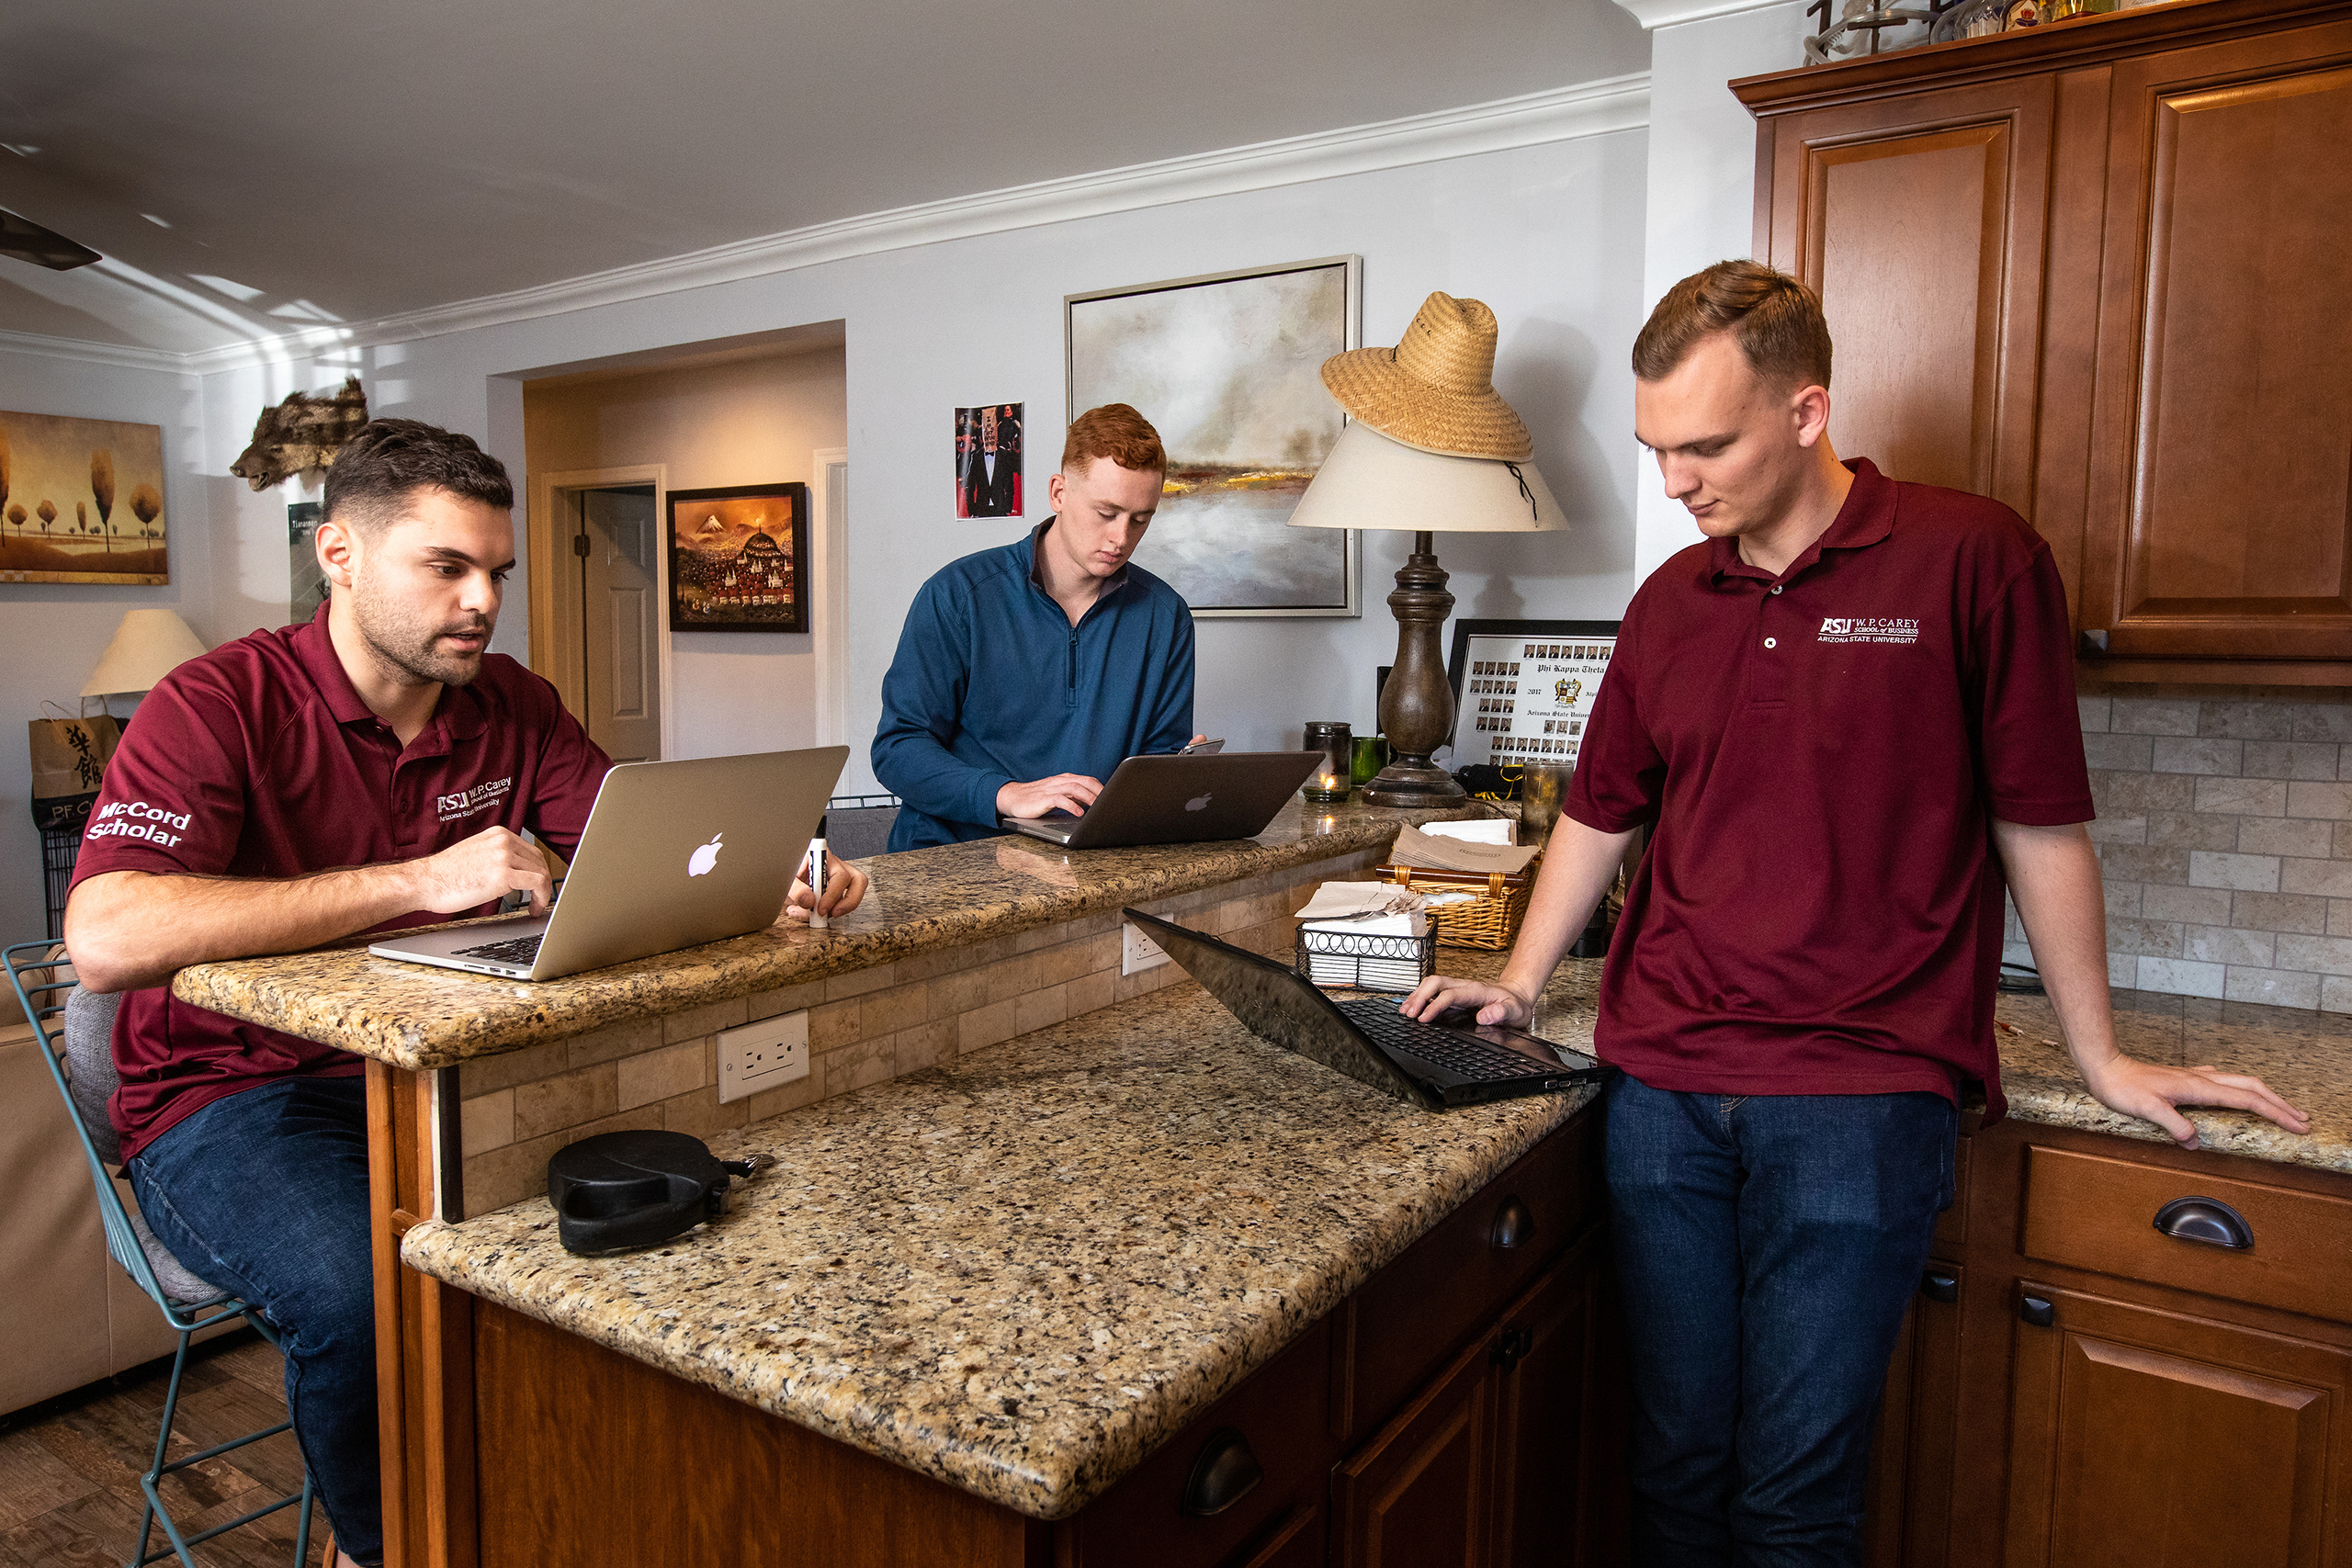 W. P. Carey School of Business seniors Tristan Gaynor, left, George Heiler, and Kevin Murphy, right, relax at their Tempe home before classes Friday, Jan. 18, 2019. 